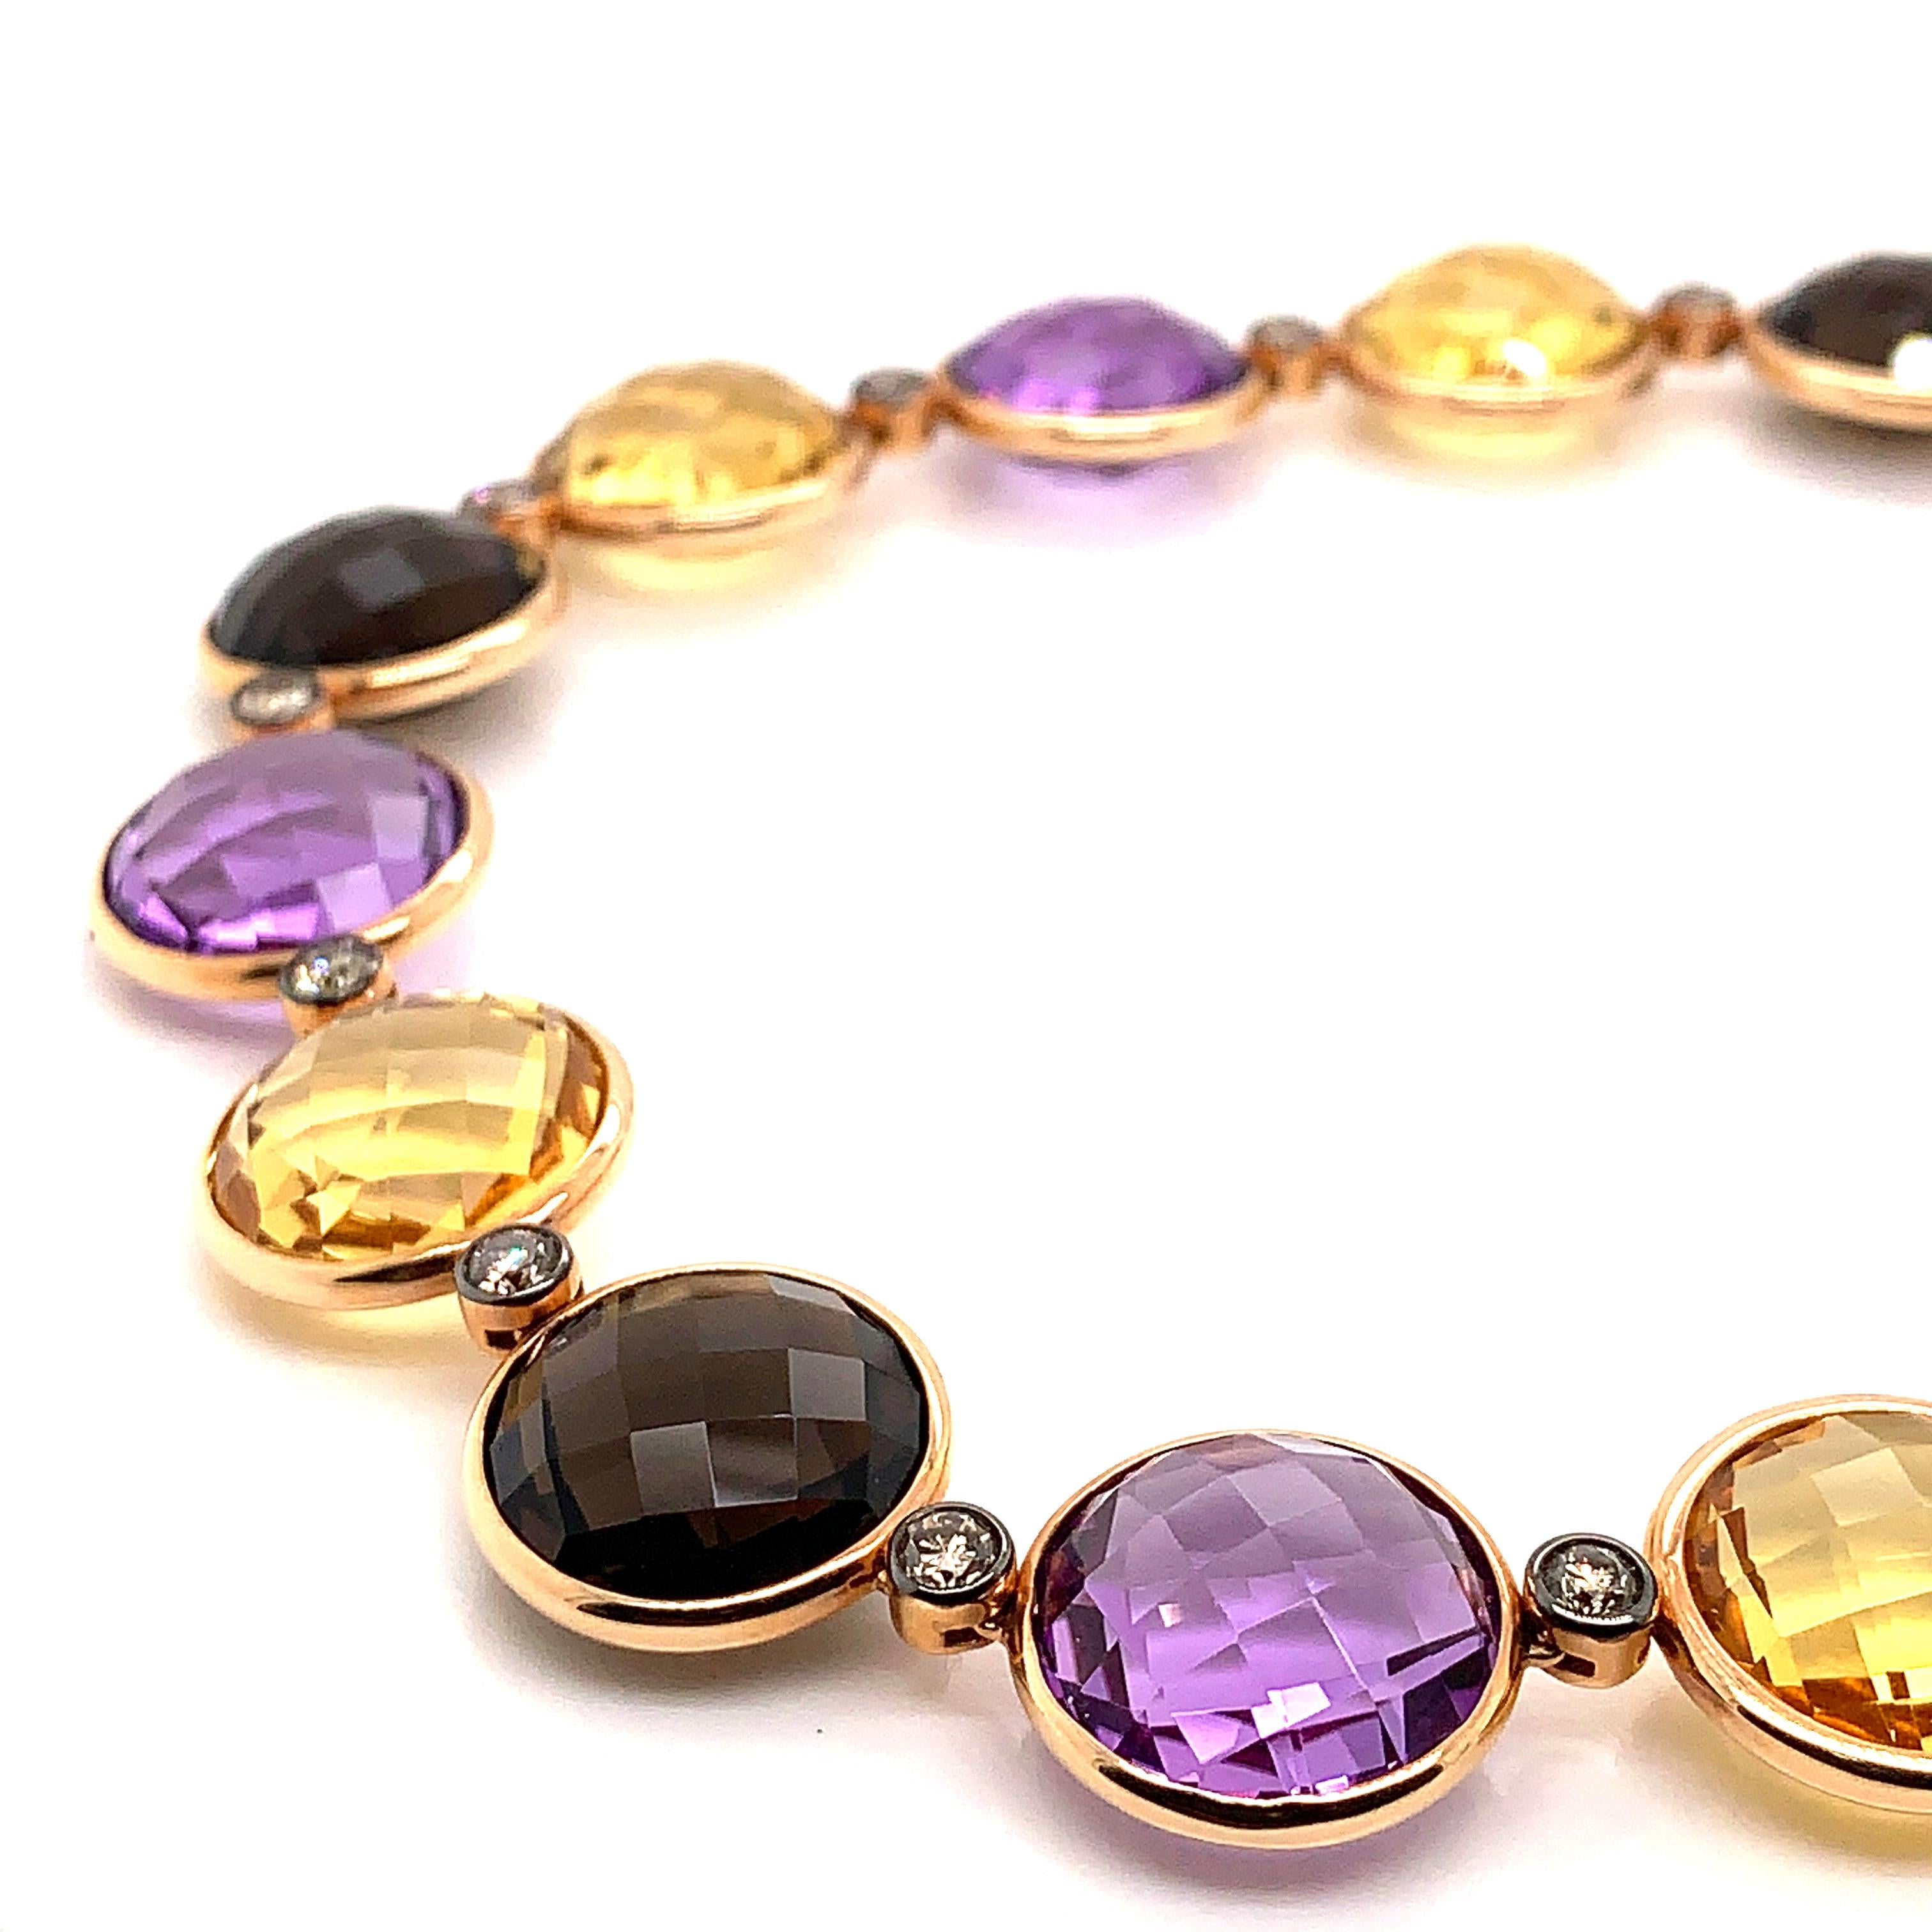 Glamorous Gemstones - Sunita Nahata started off her career as a gemstone trader, and this particular collection reflects her love for multi-coloured semi-precious gemstones. This necklace features over a hundred and seventy carats of semi previous